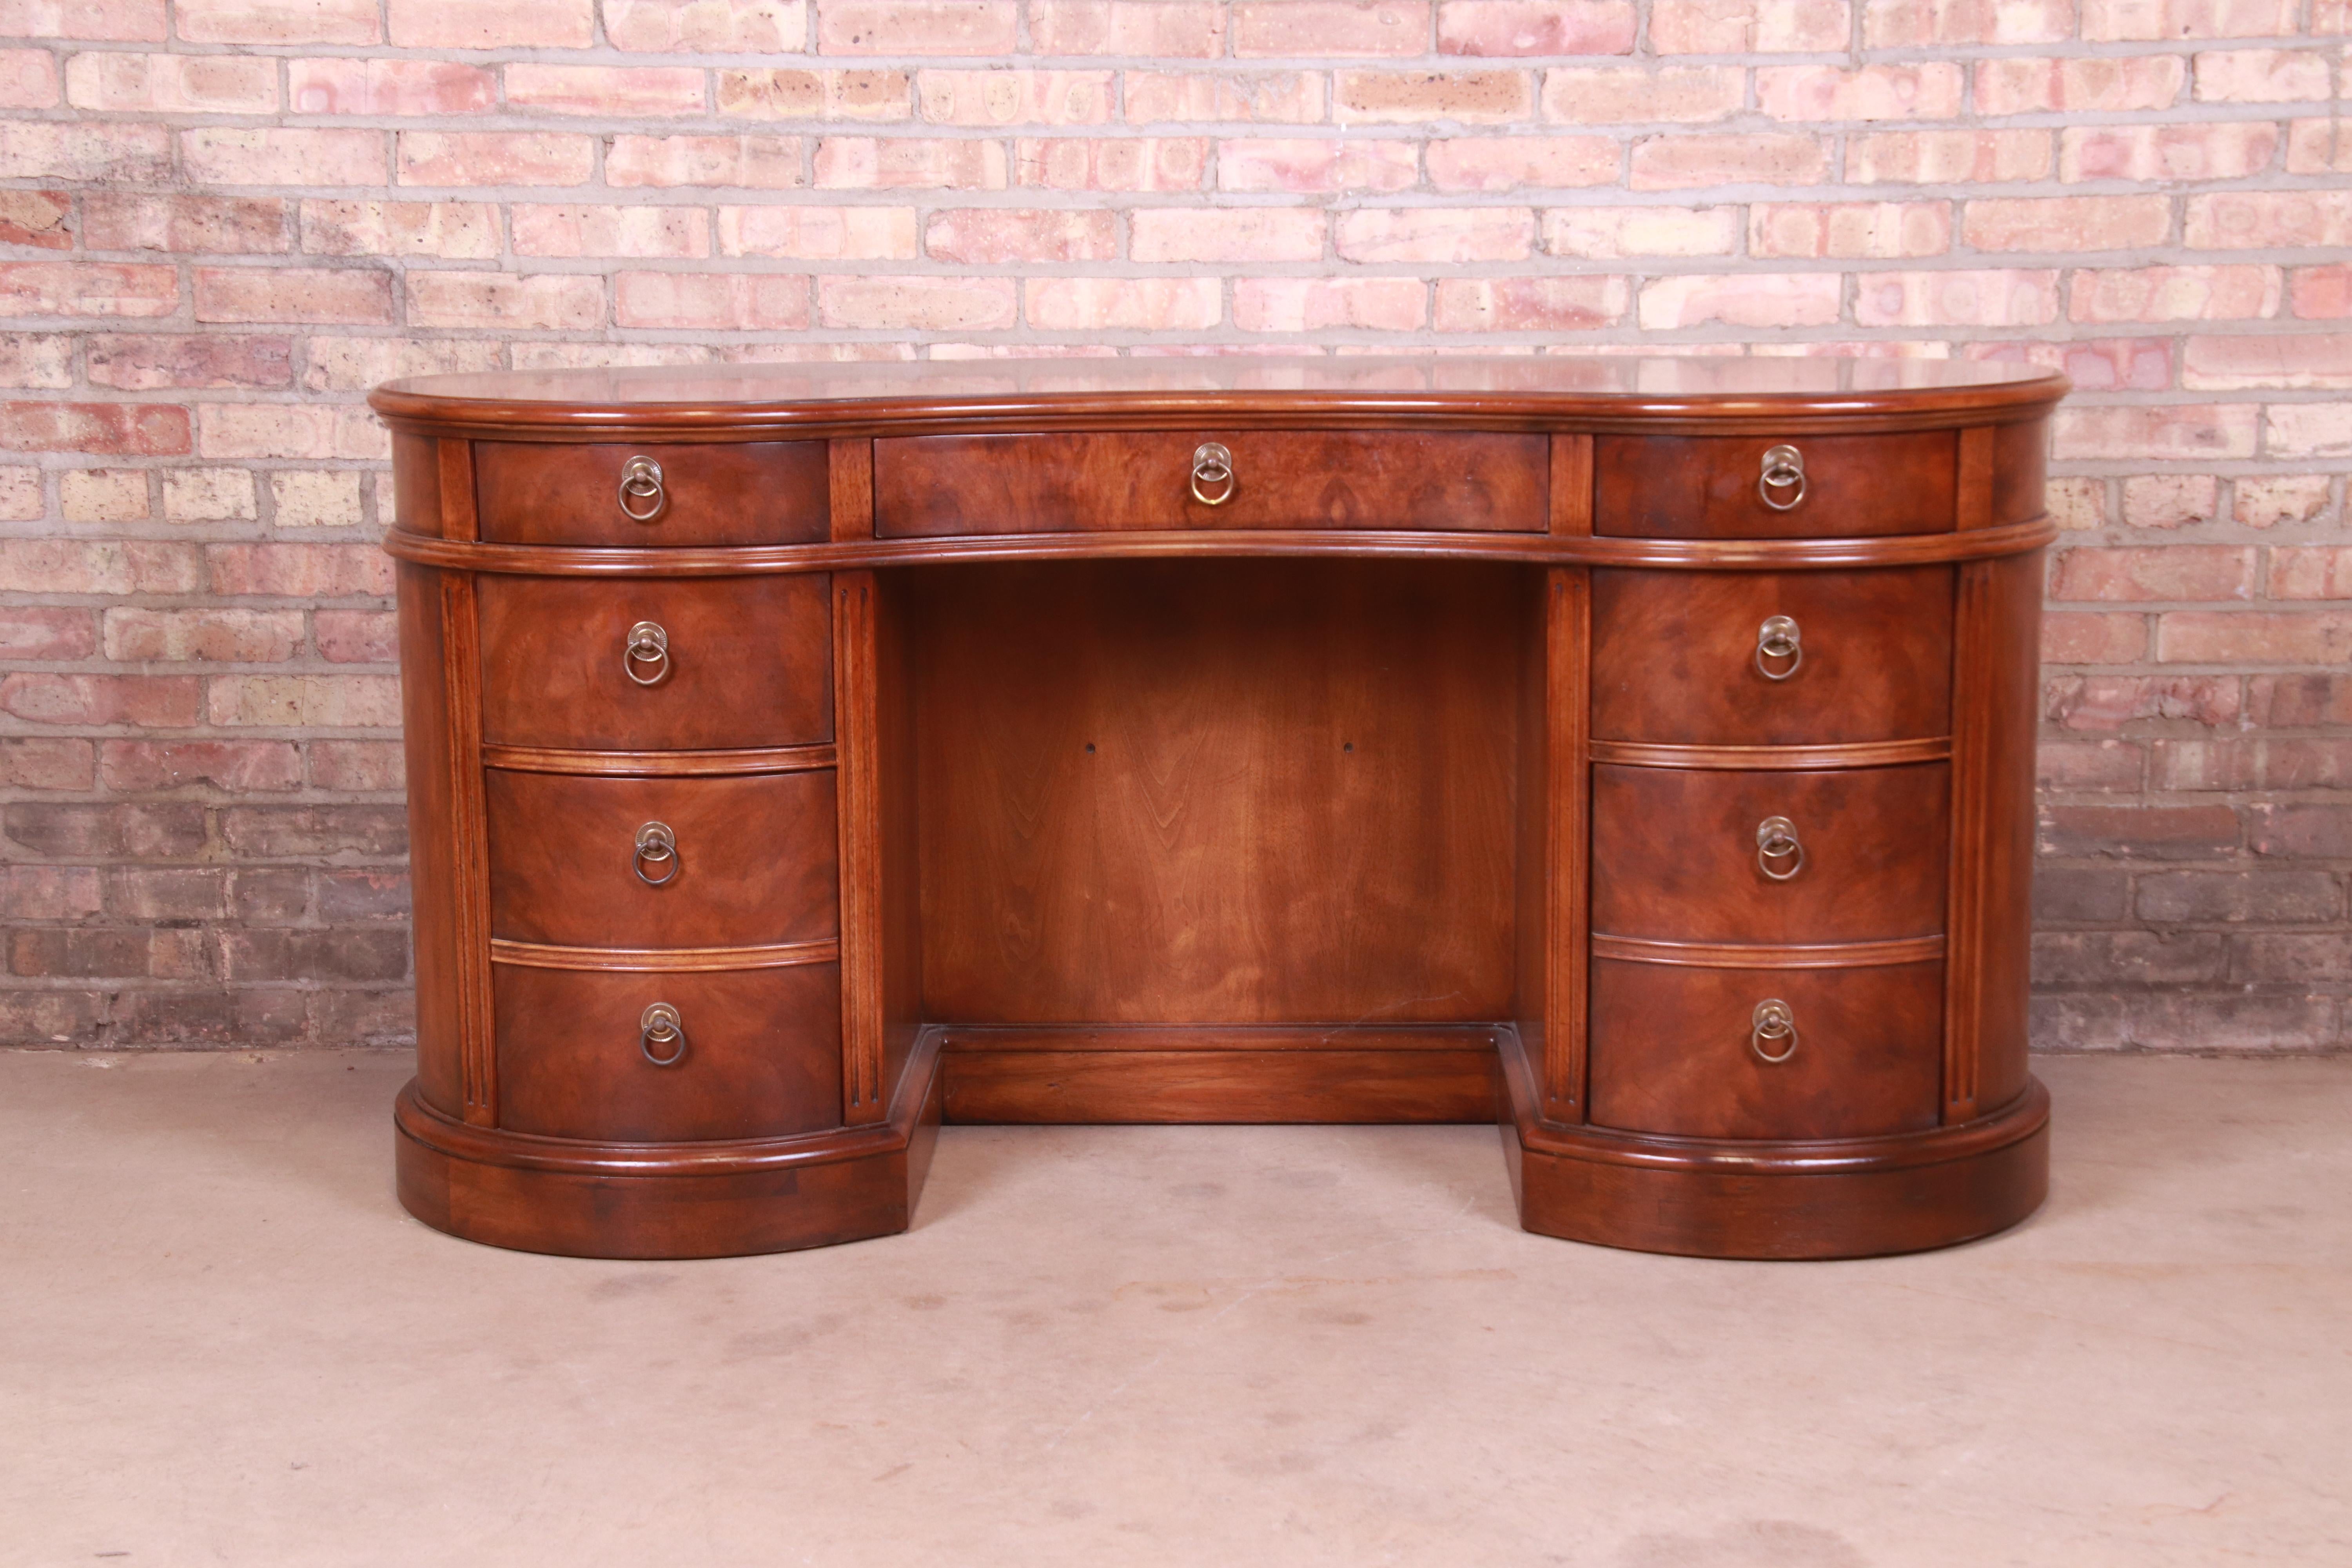 An exceptional Regency style kidney shaped writing desk with built-in bookcase

By Drexel Heritage

USA, Circa 1980s

Mahogany and burl wood, with original brass hardware.

Measures: 60